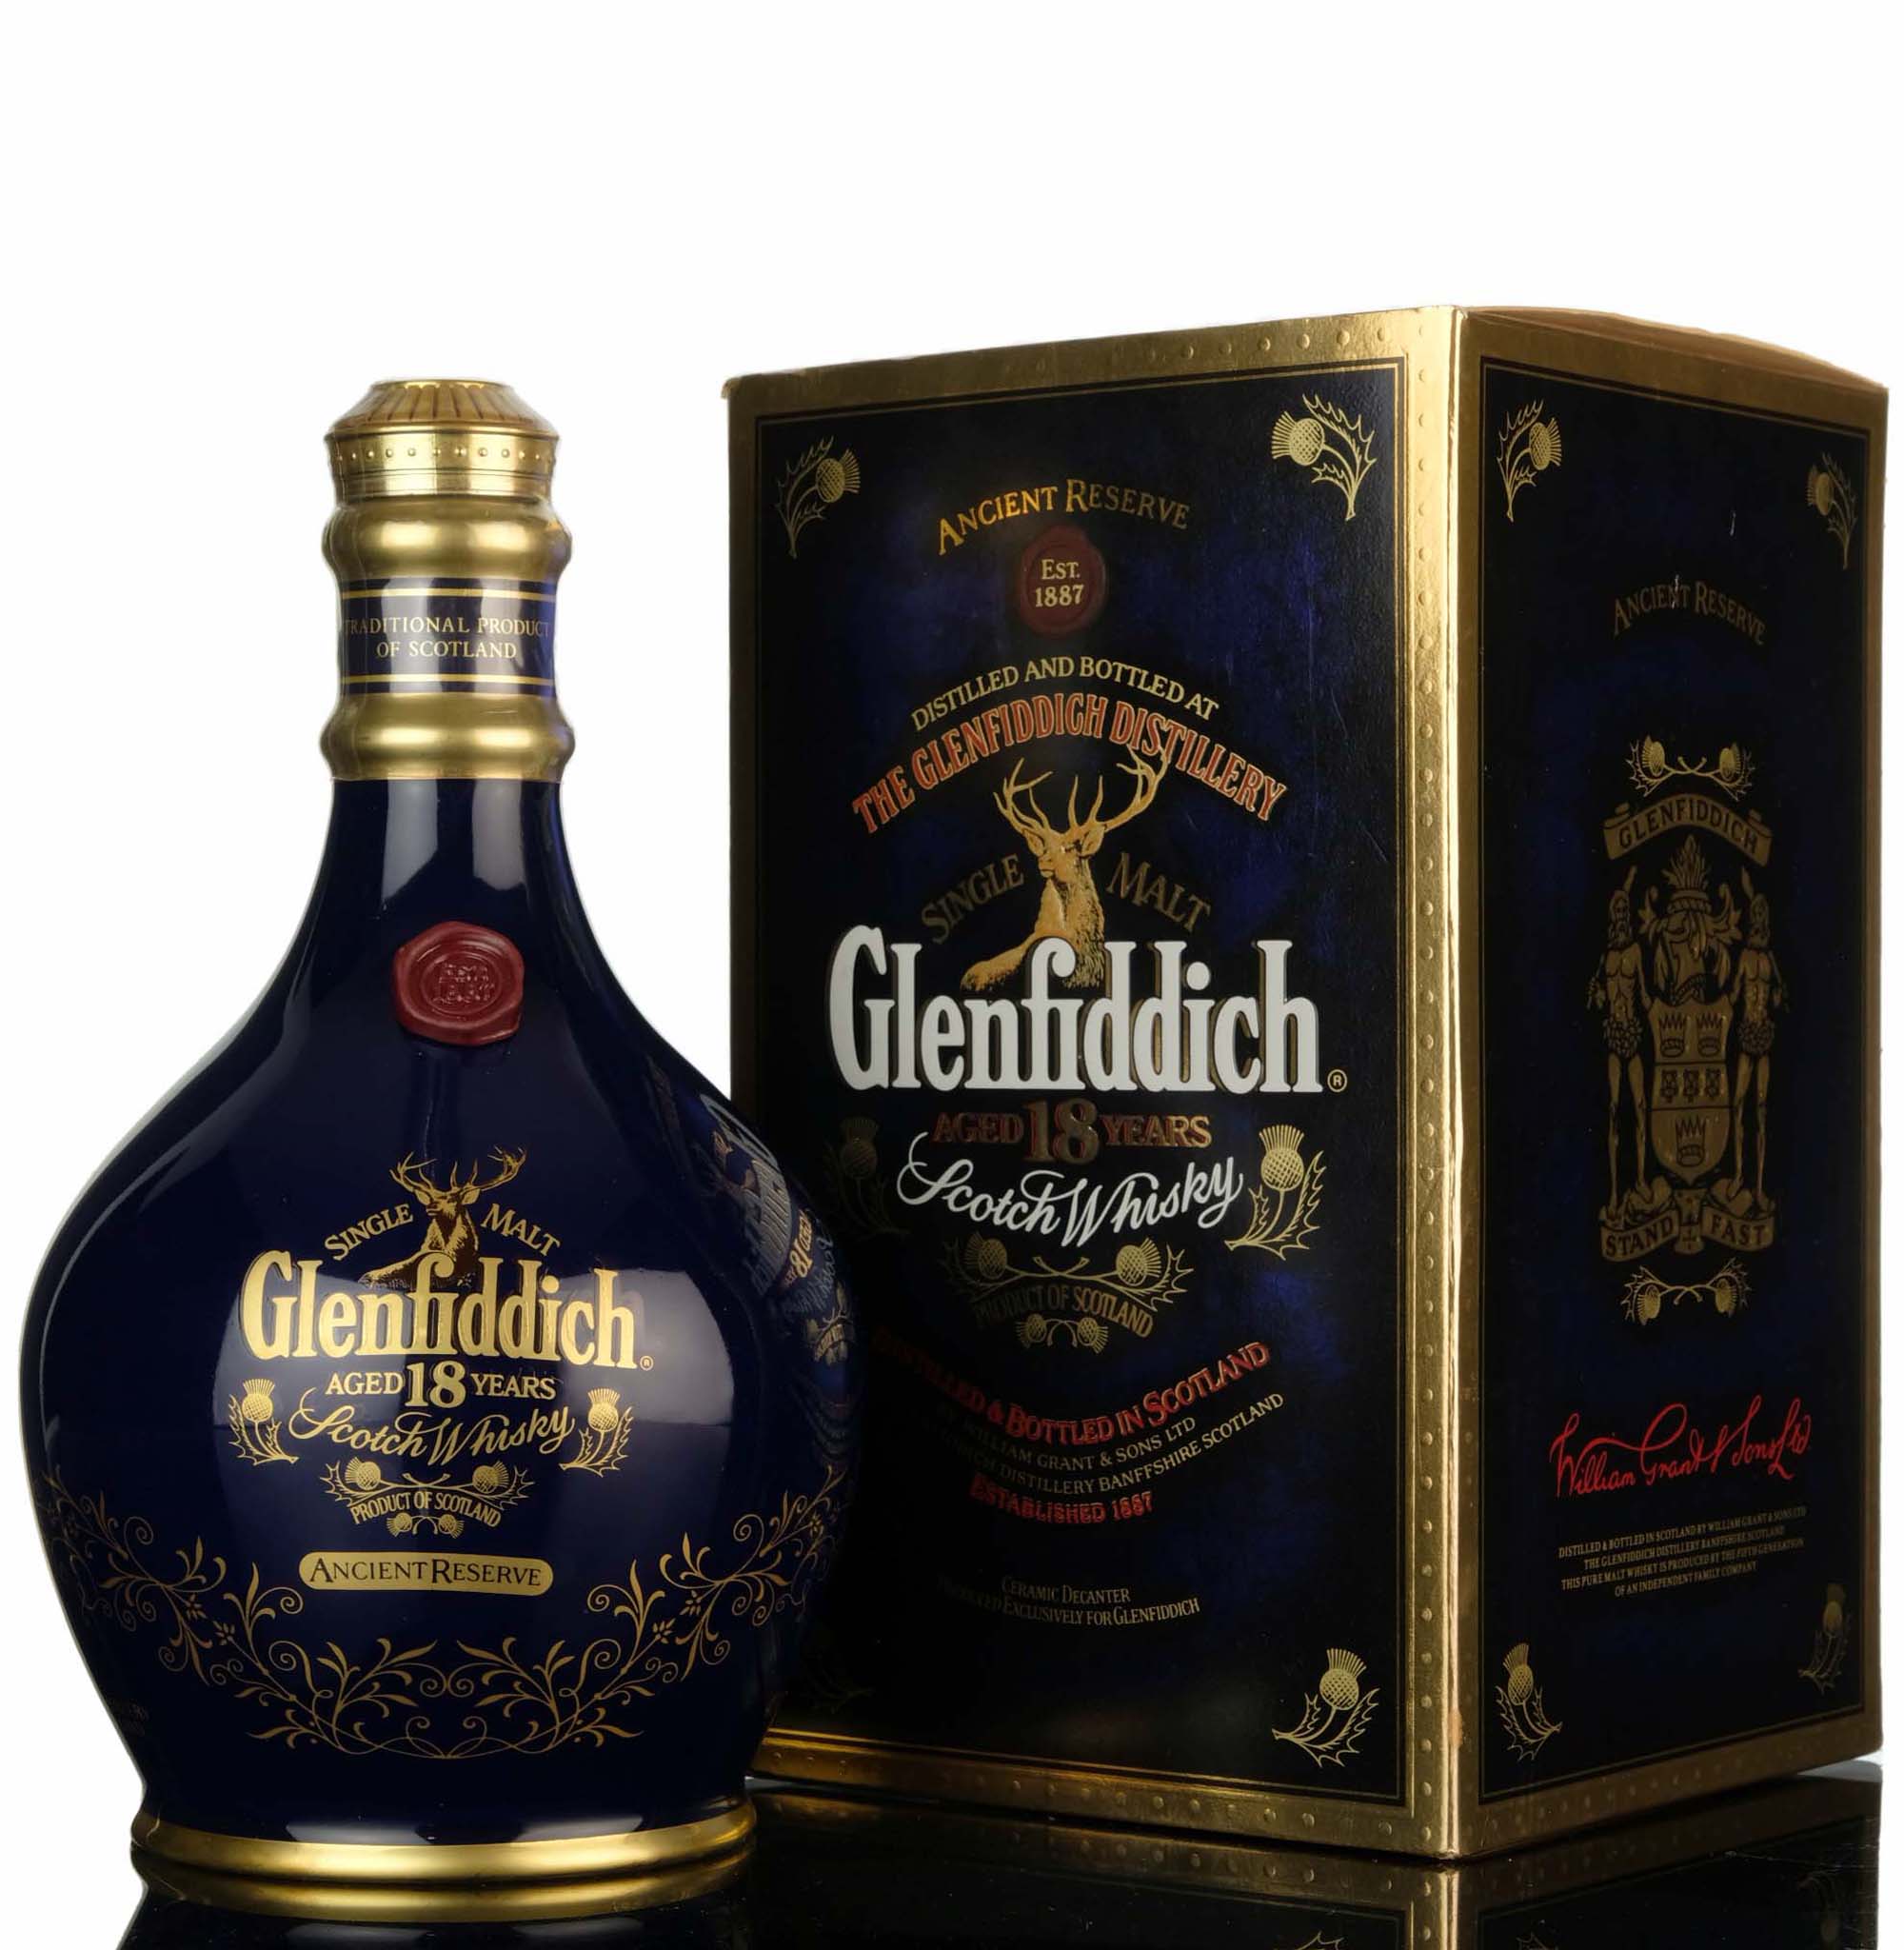 Glenfiddich 18 Year Old - Ancient Reserve - Blue Ceramic - 1990s